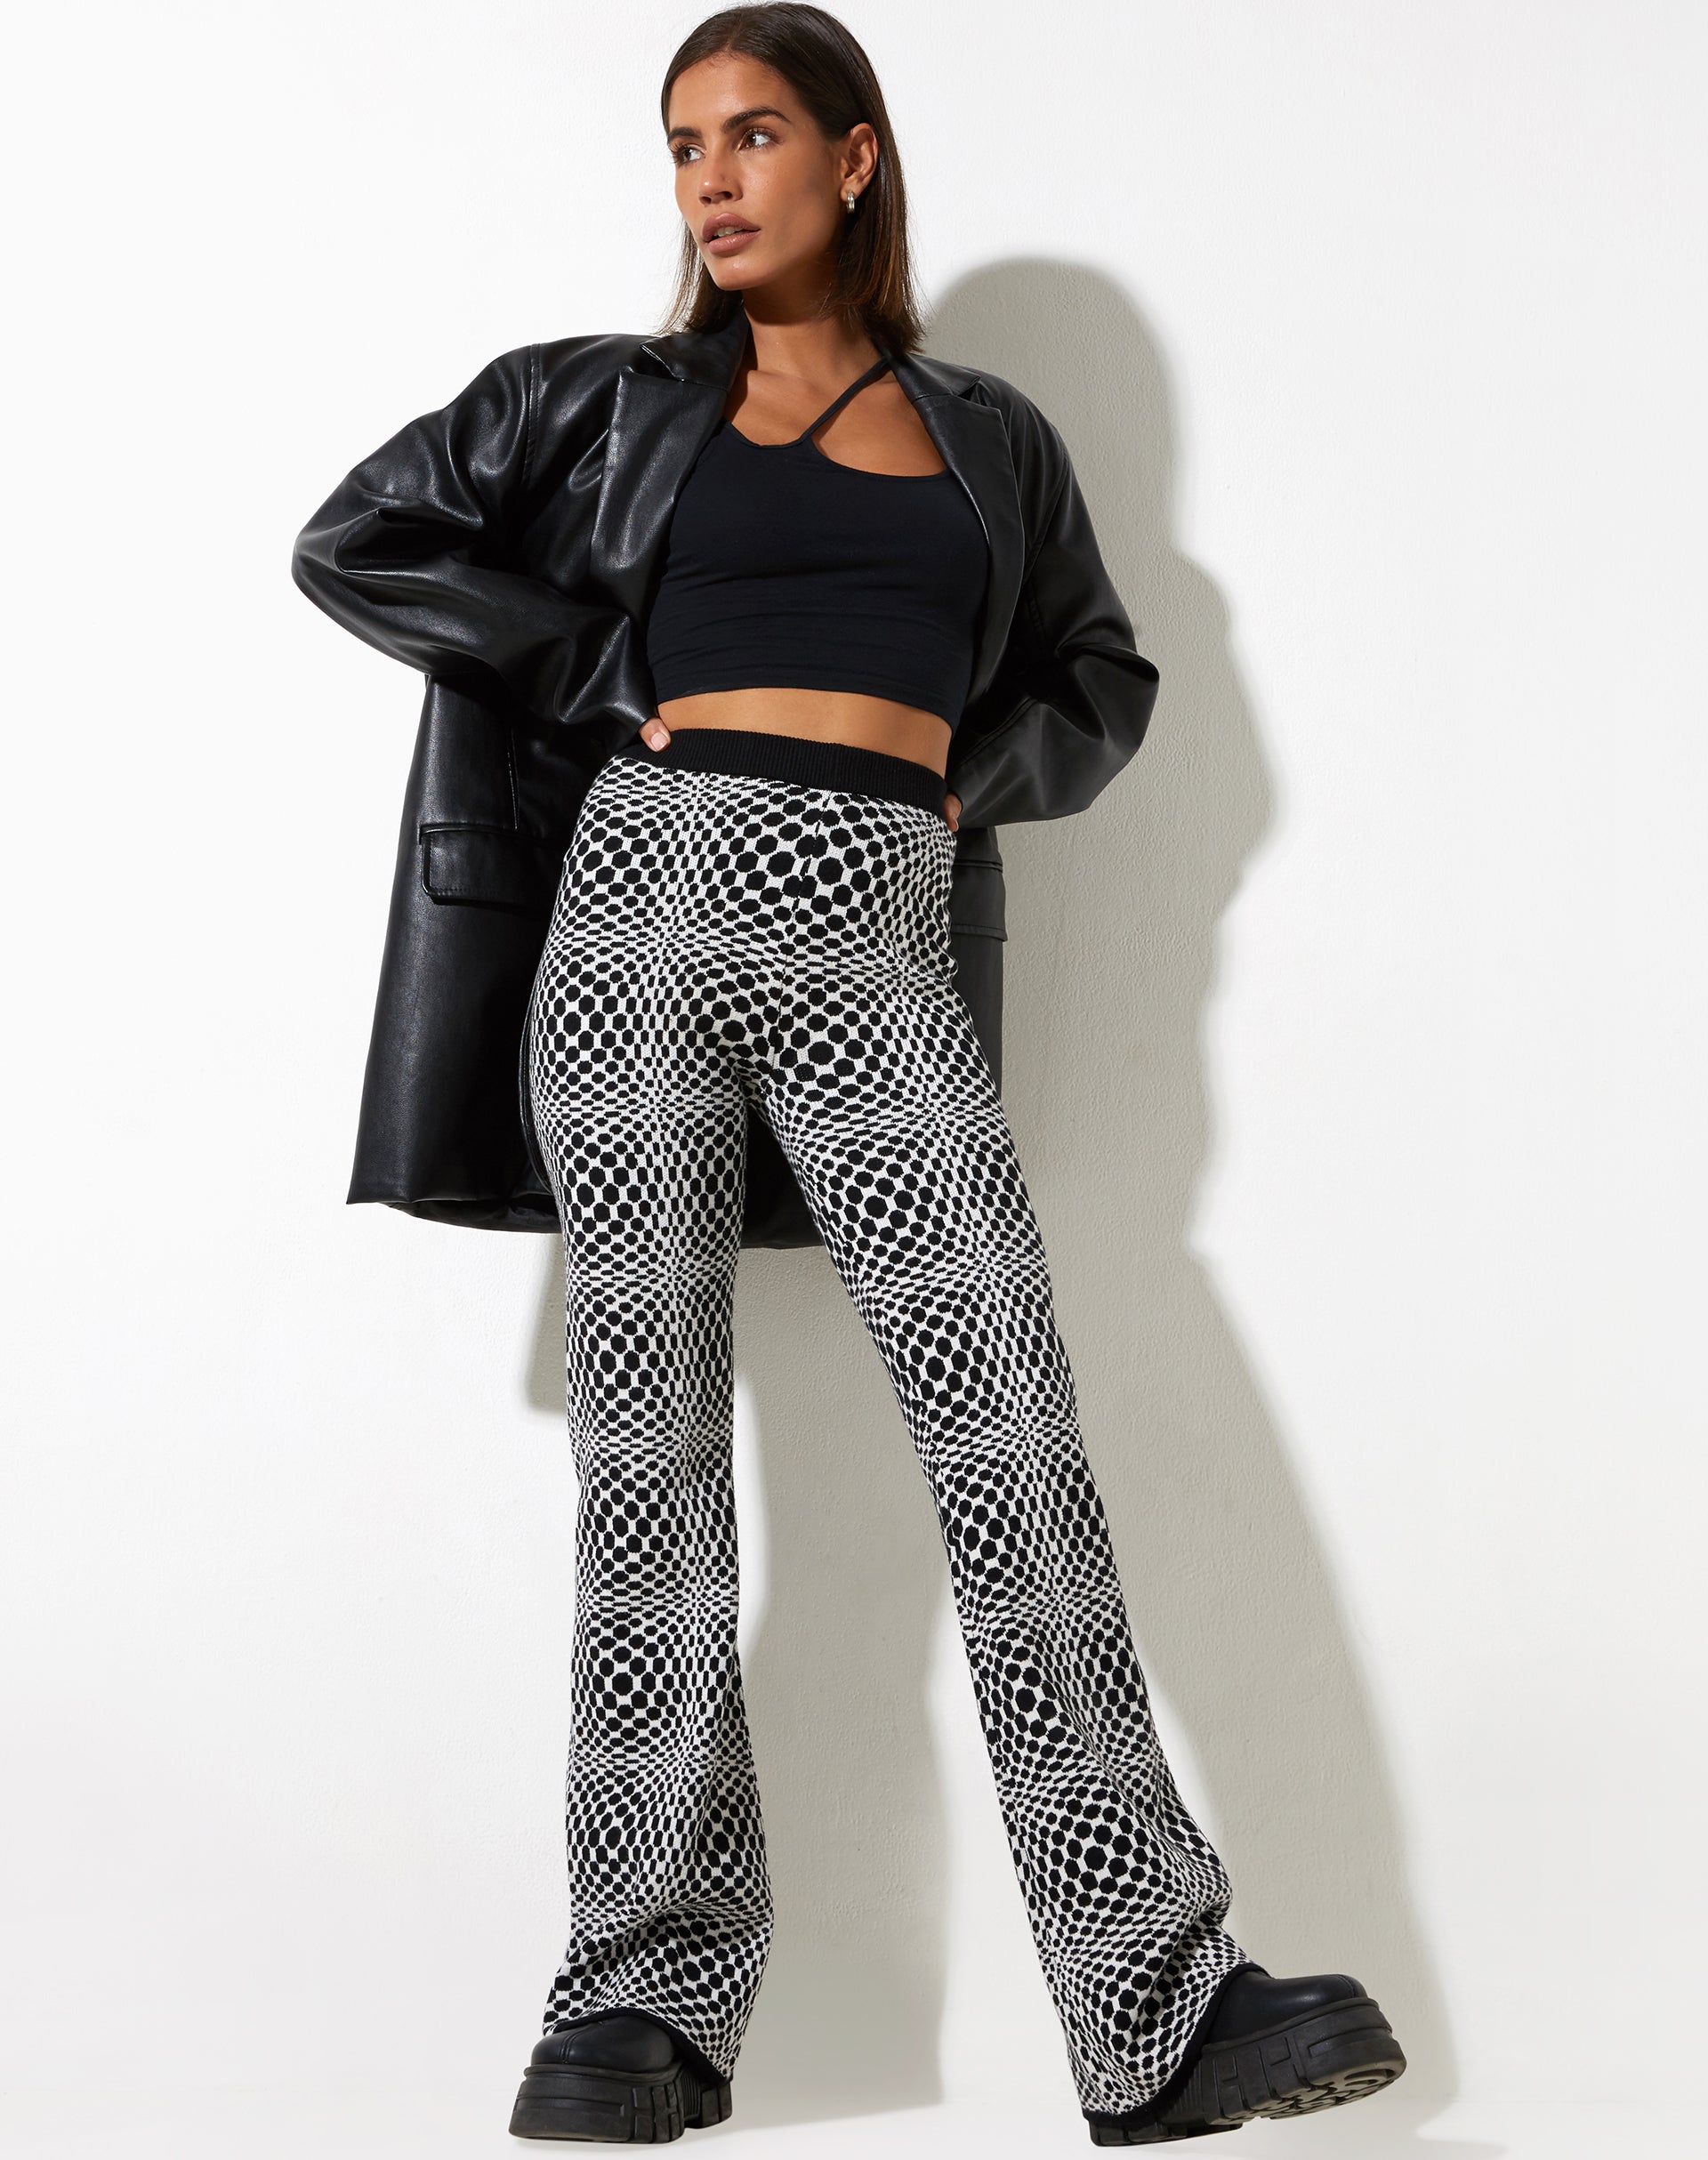 Image of Yuana Trouser in Optic Monochrome Square Black and White